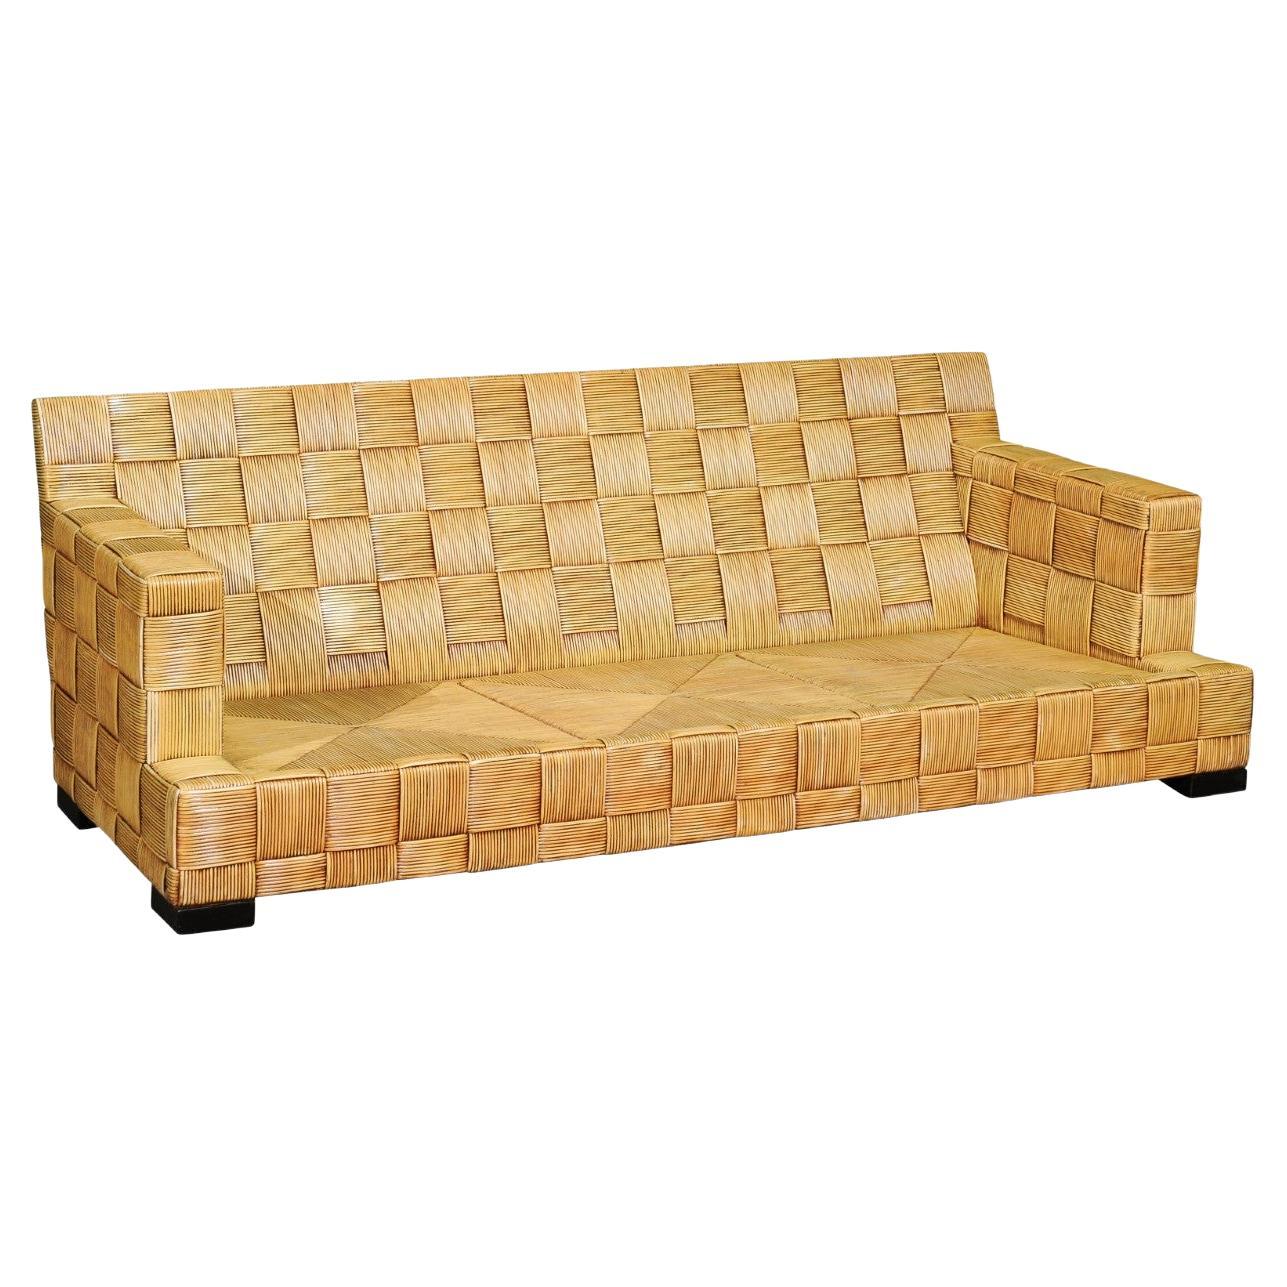 Stellar Vintage Block Island Collection Cane Sofa by John Hutton for Donghia For Sale